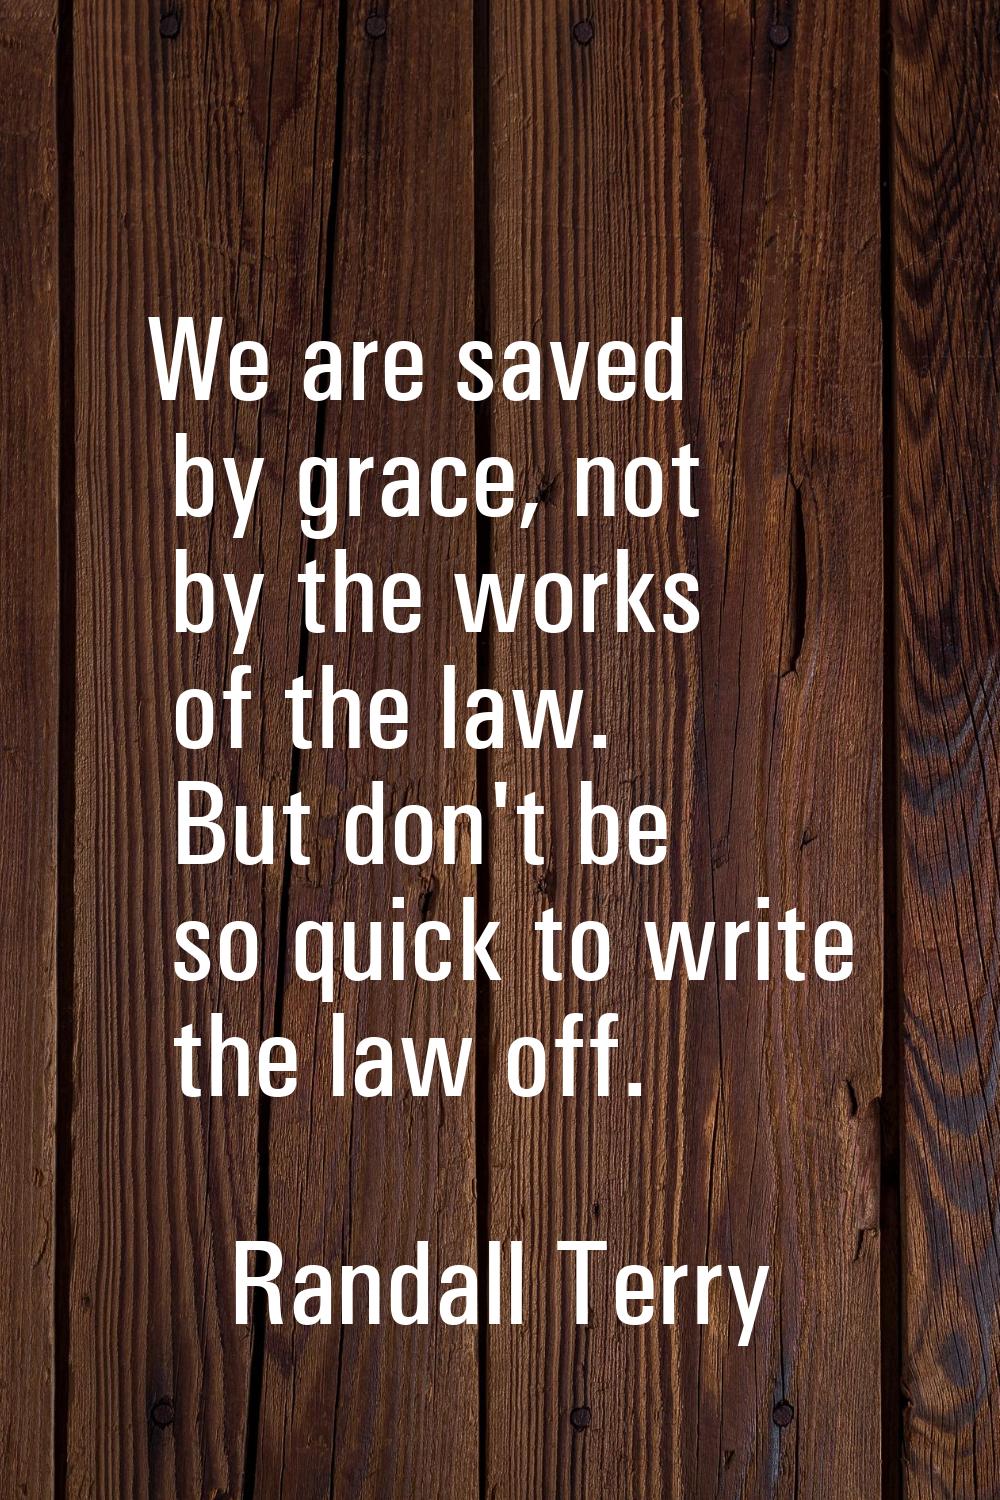 We are saved by grace, not by the works of the law. But don't be so quick to write the law off.